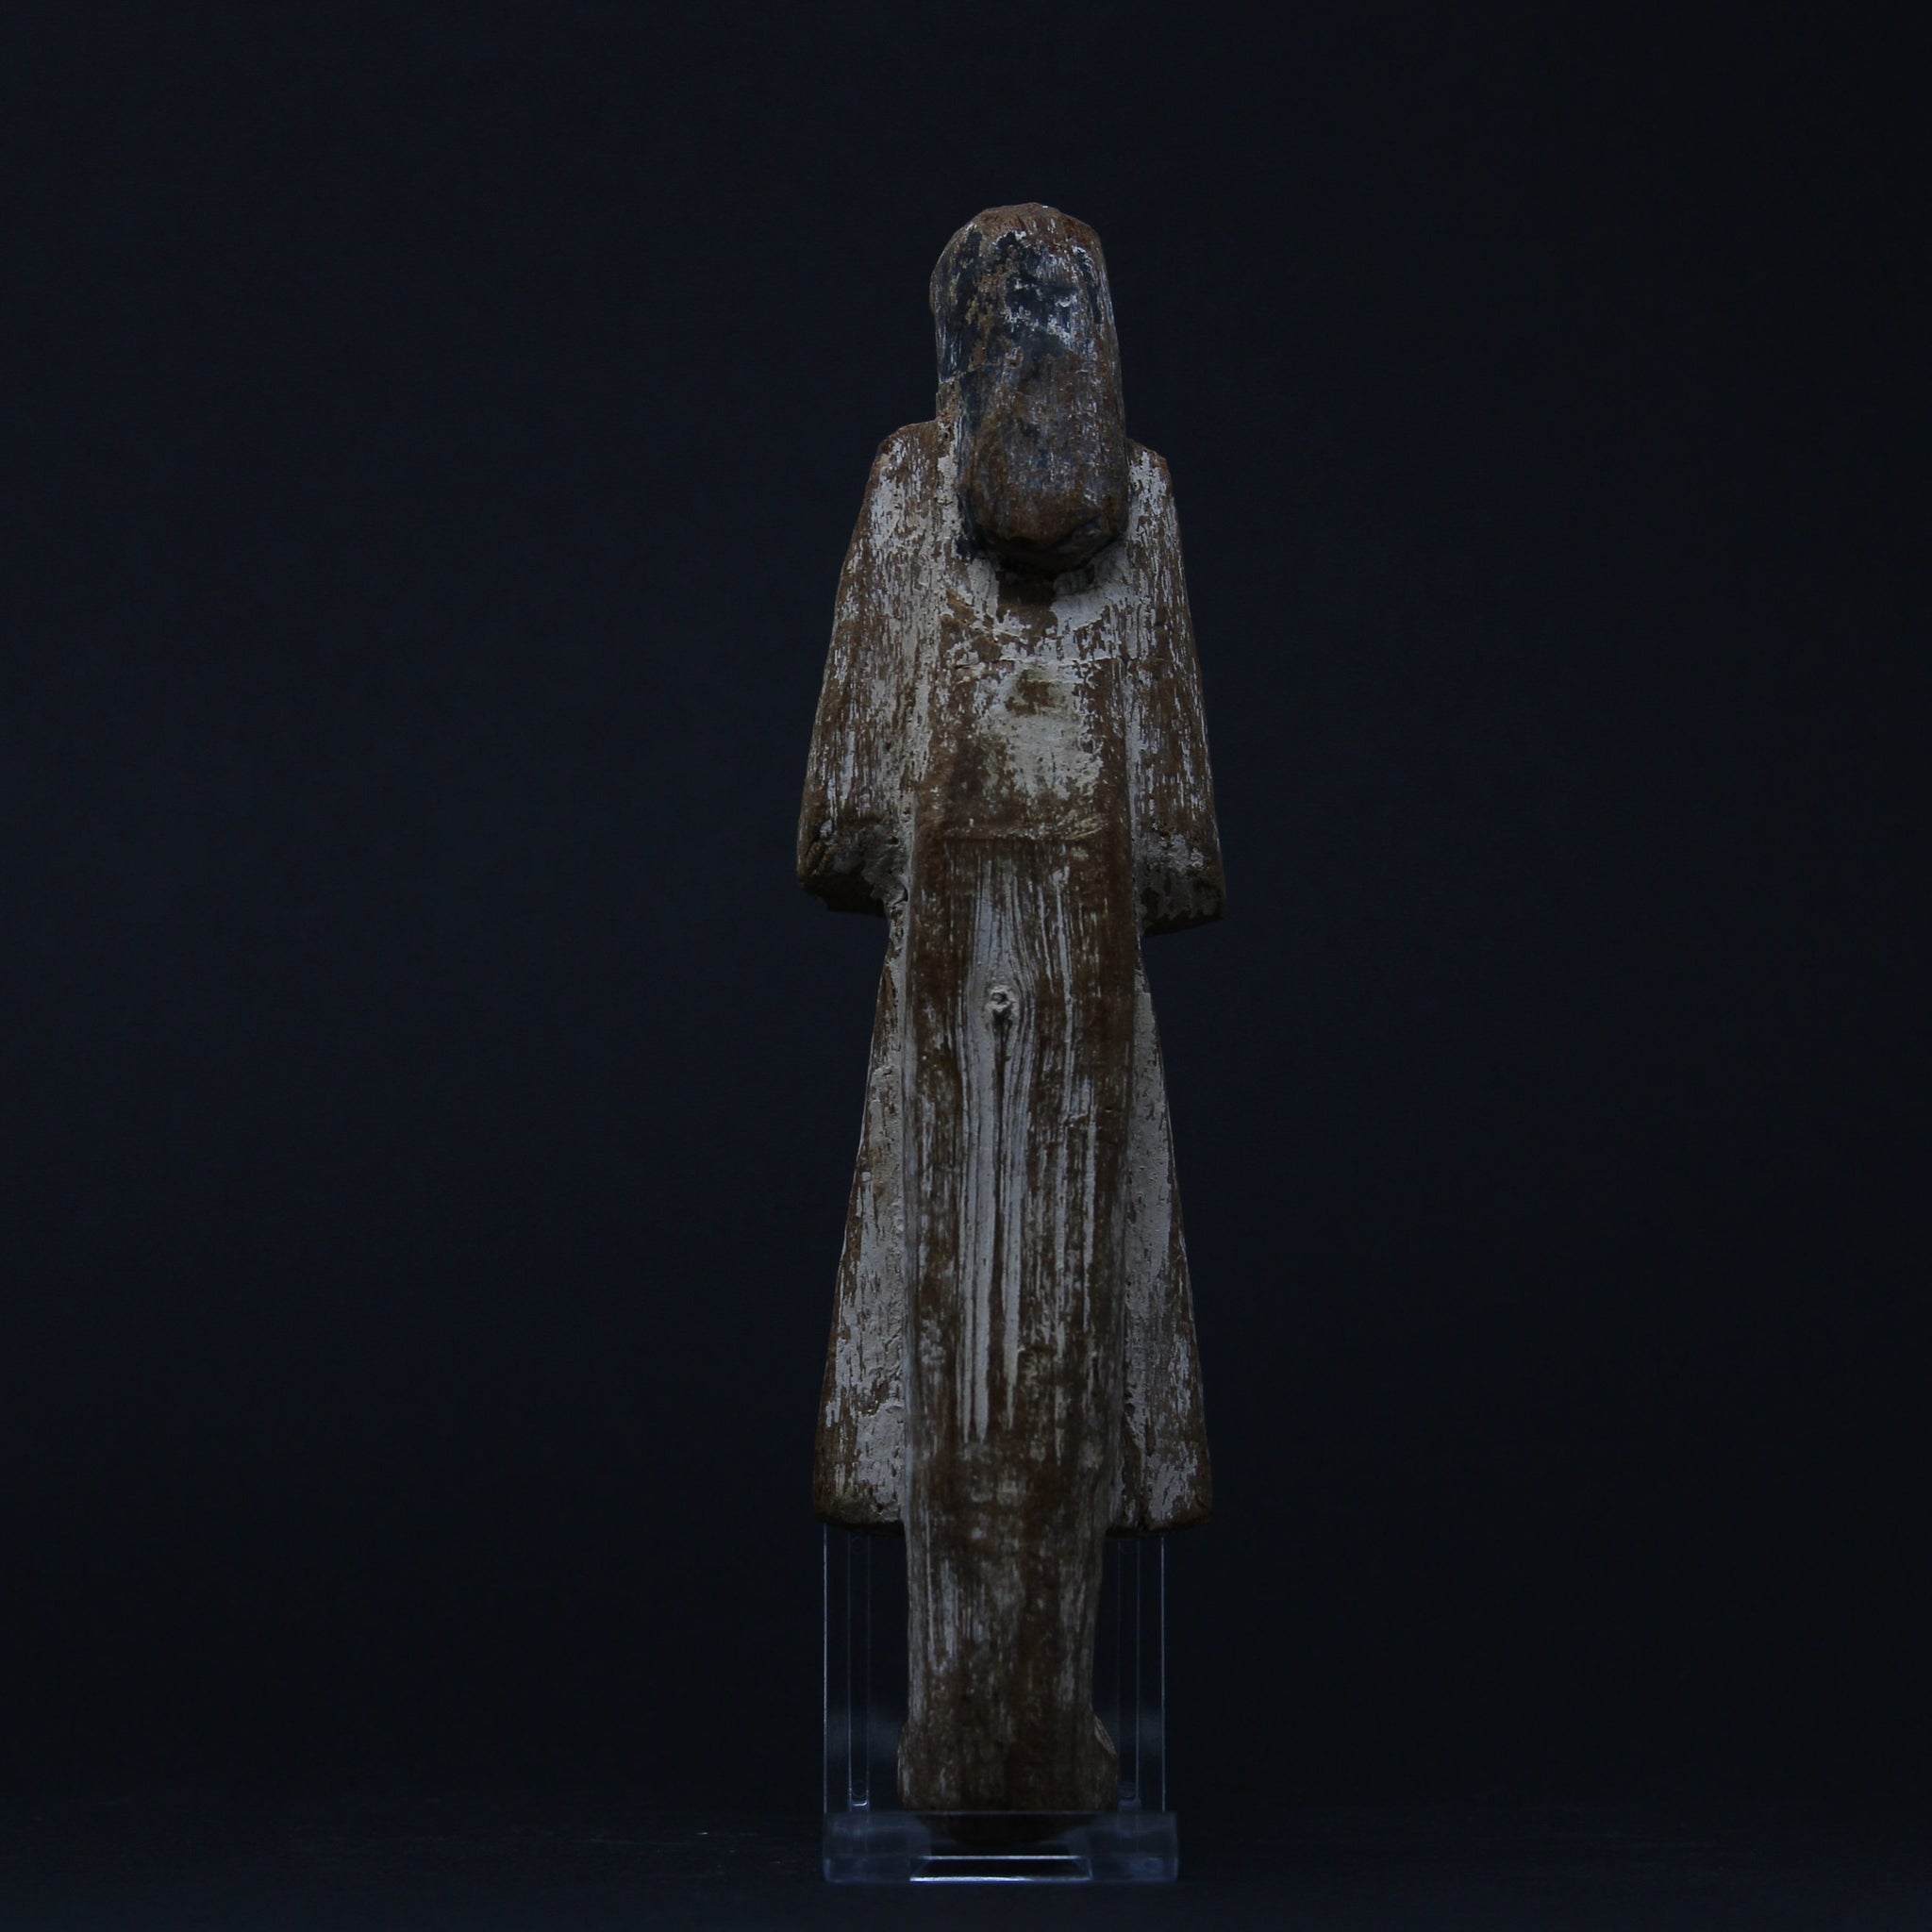 A wooden carved overseer shabti figure | Egypt, New Kingdom, 19th Dynasty, c. 1292-1189 BC